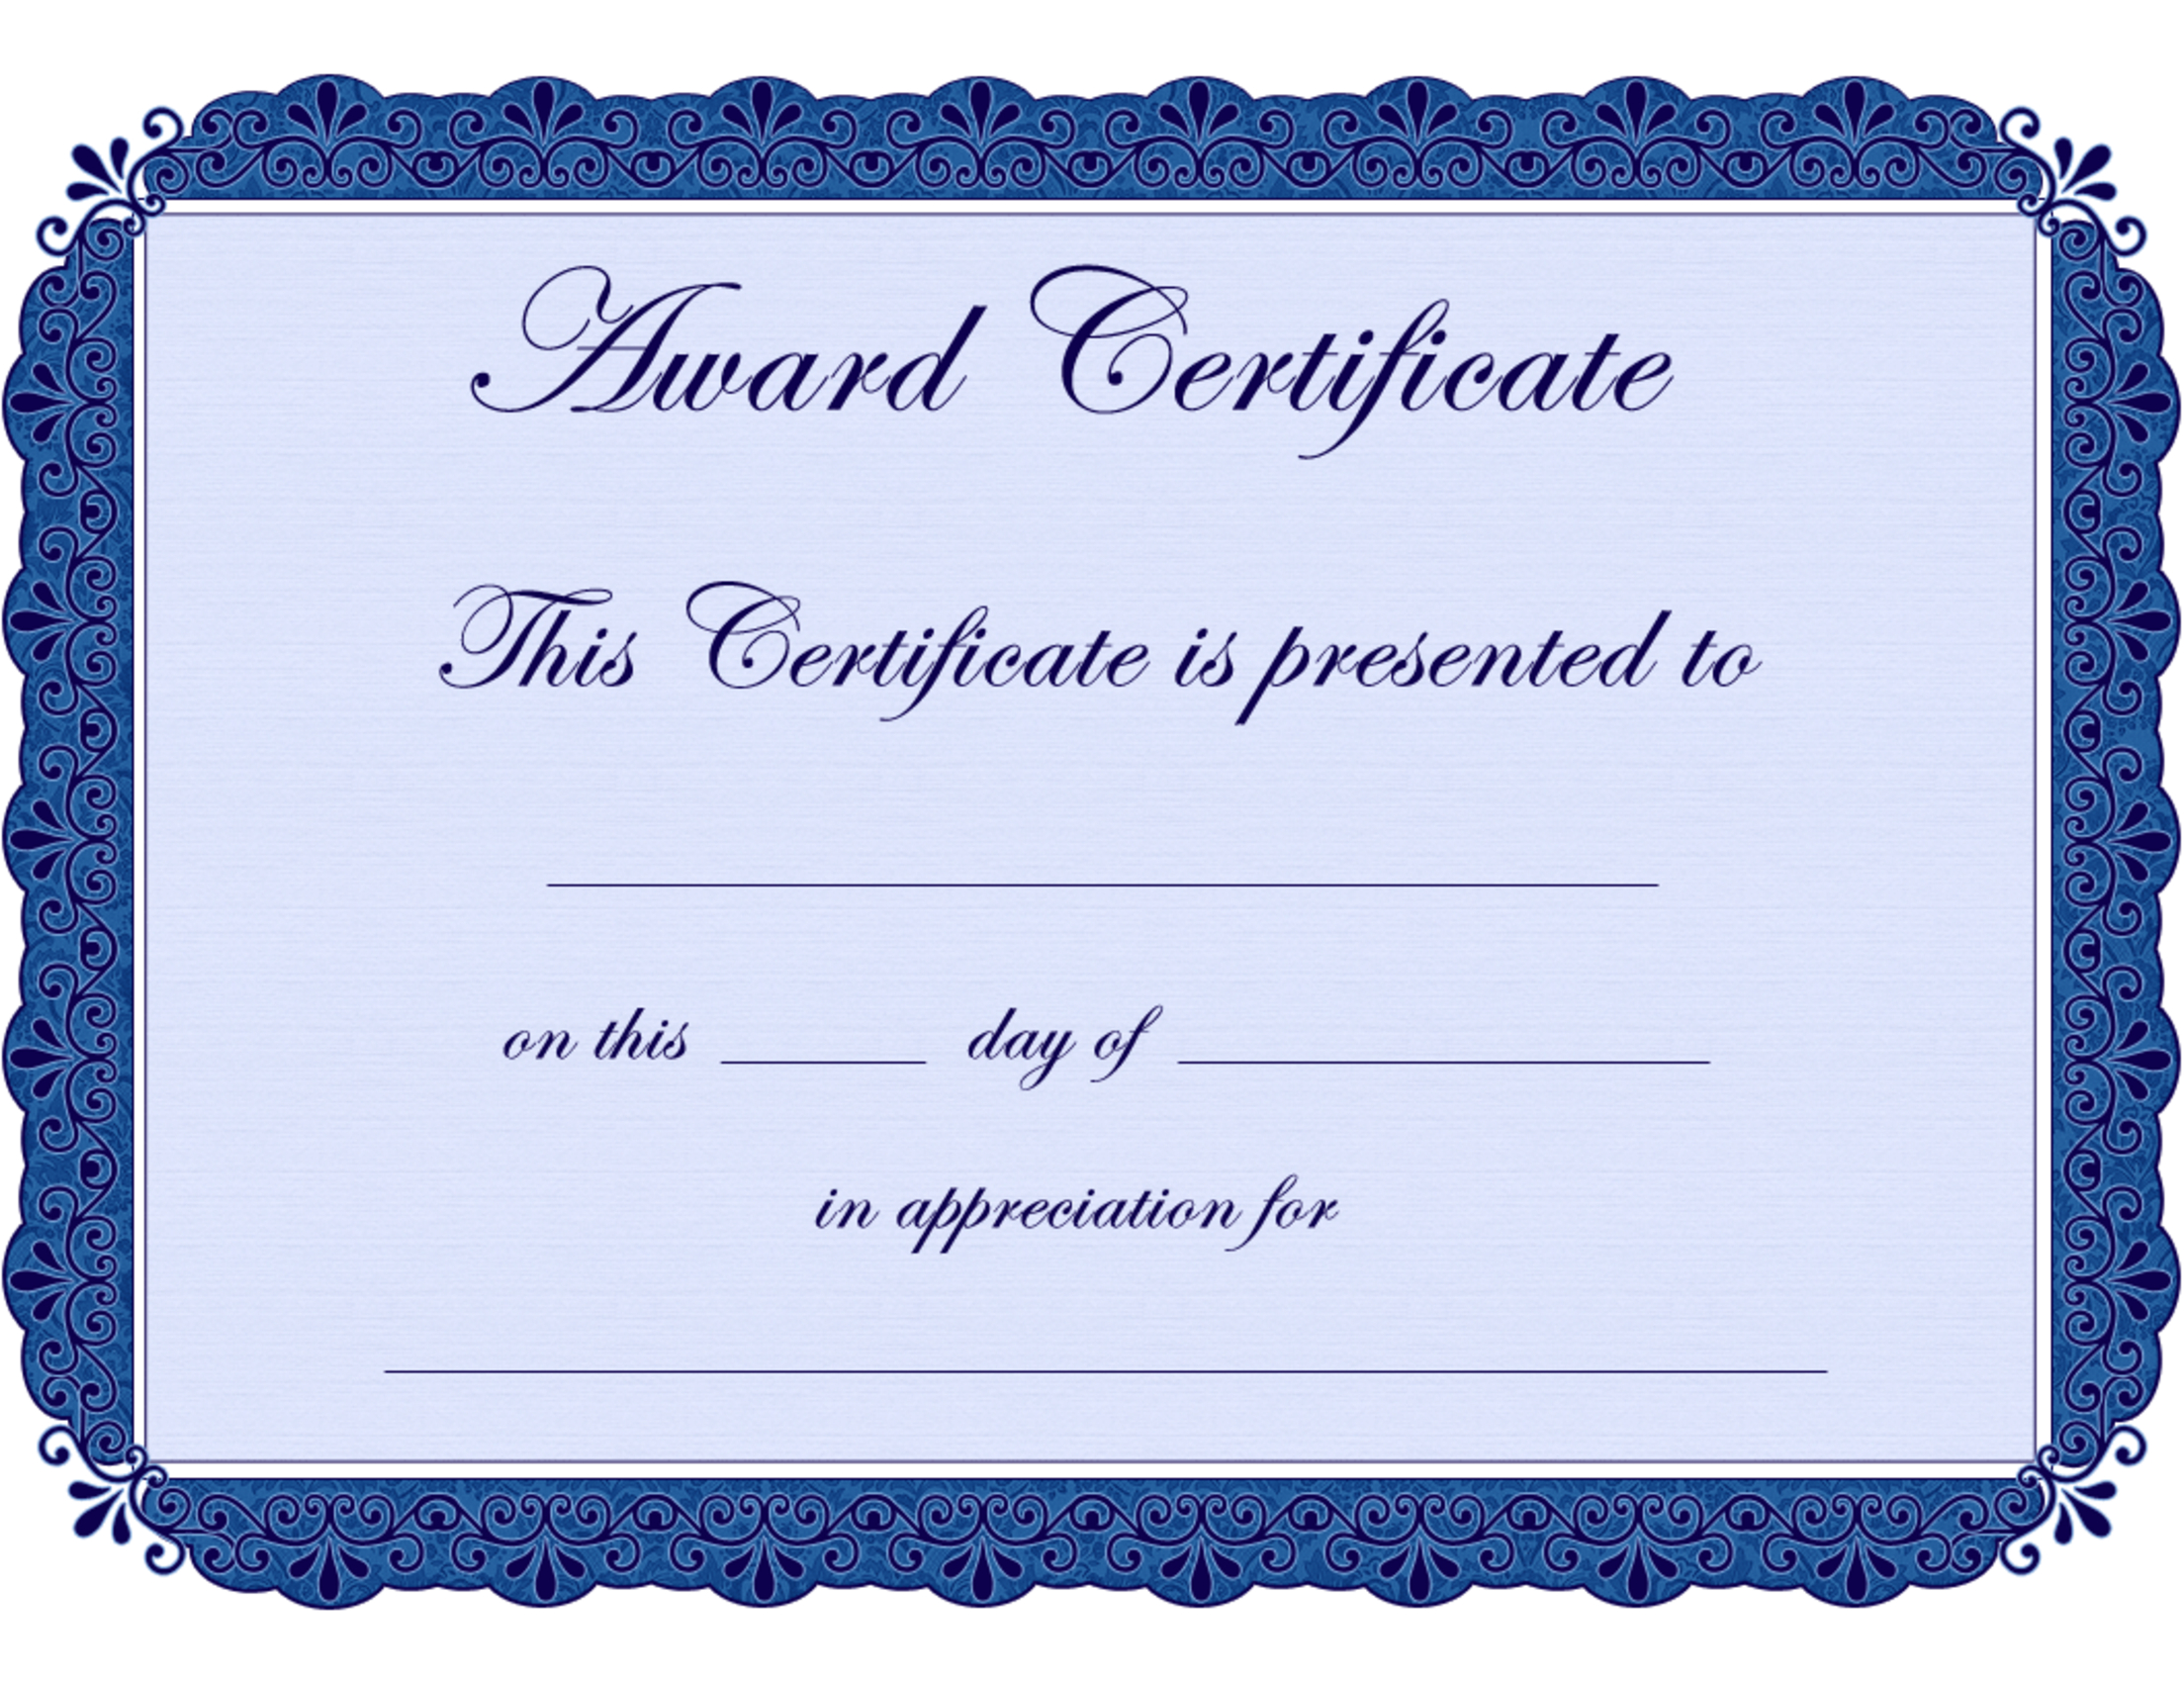 Free Printable Award Certificate Borders |  Award Intended For Word 2013 Certificate Template